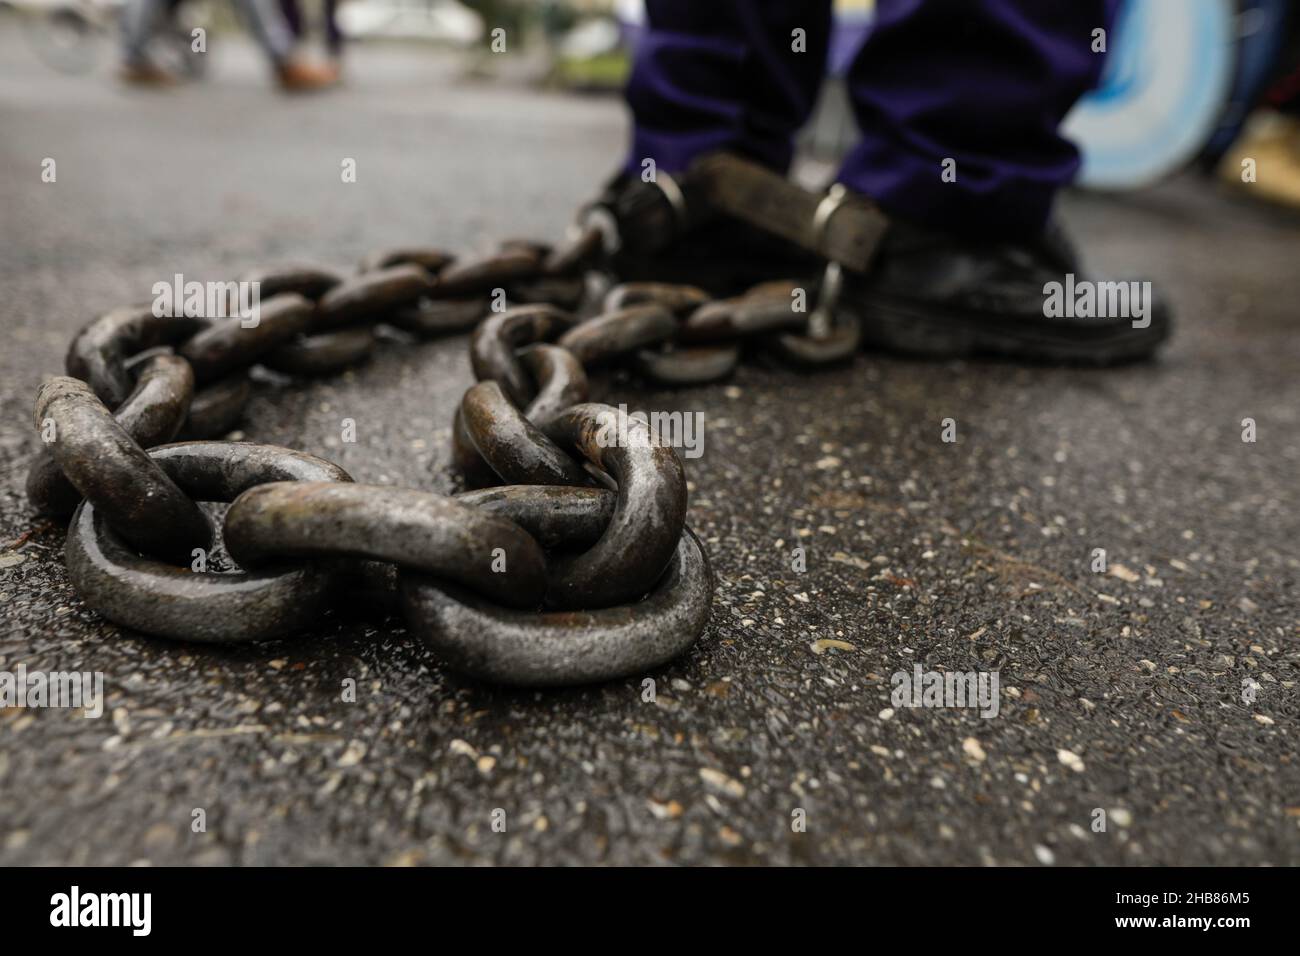 Shallow depth of field (selective focus) details with a rusty metal chain tied to a man’s feet. Stock Photo